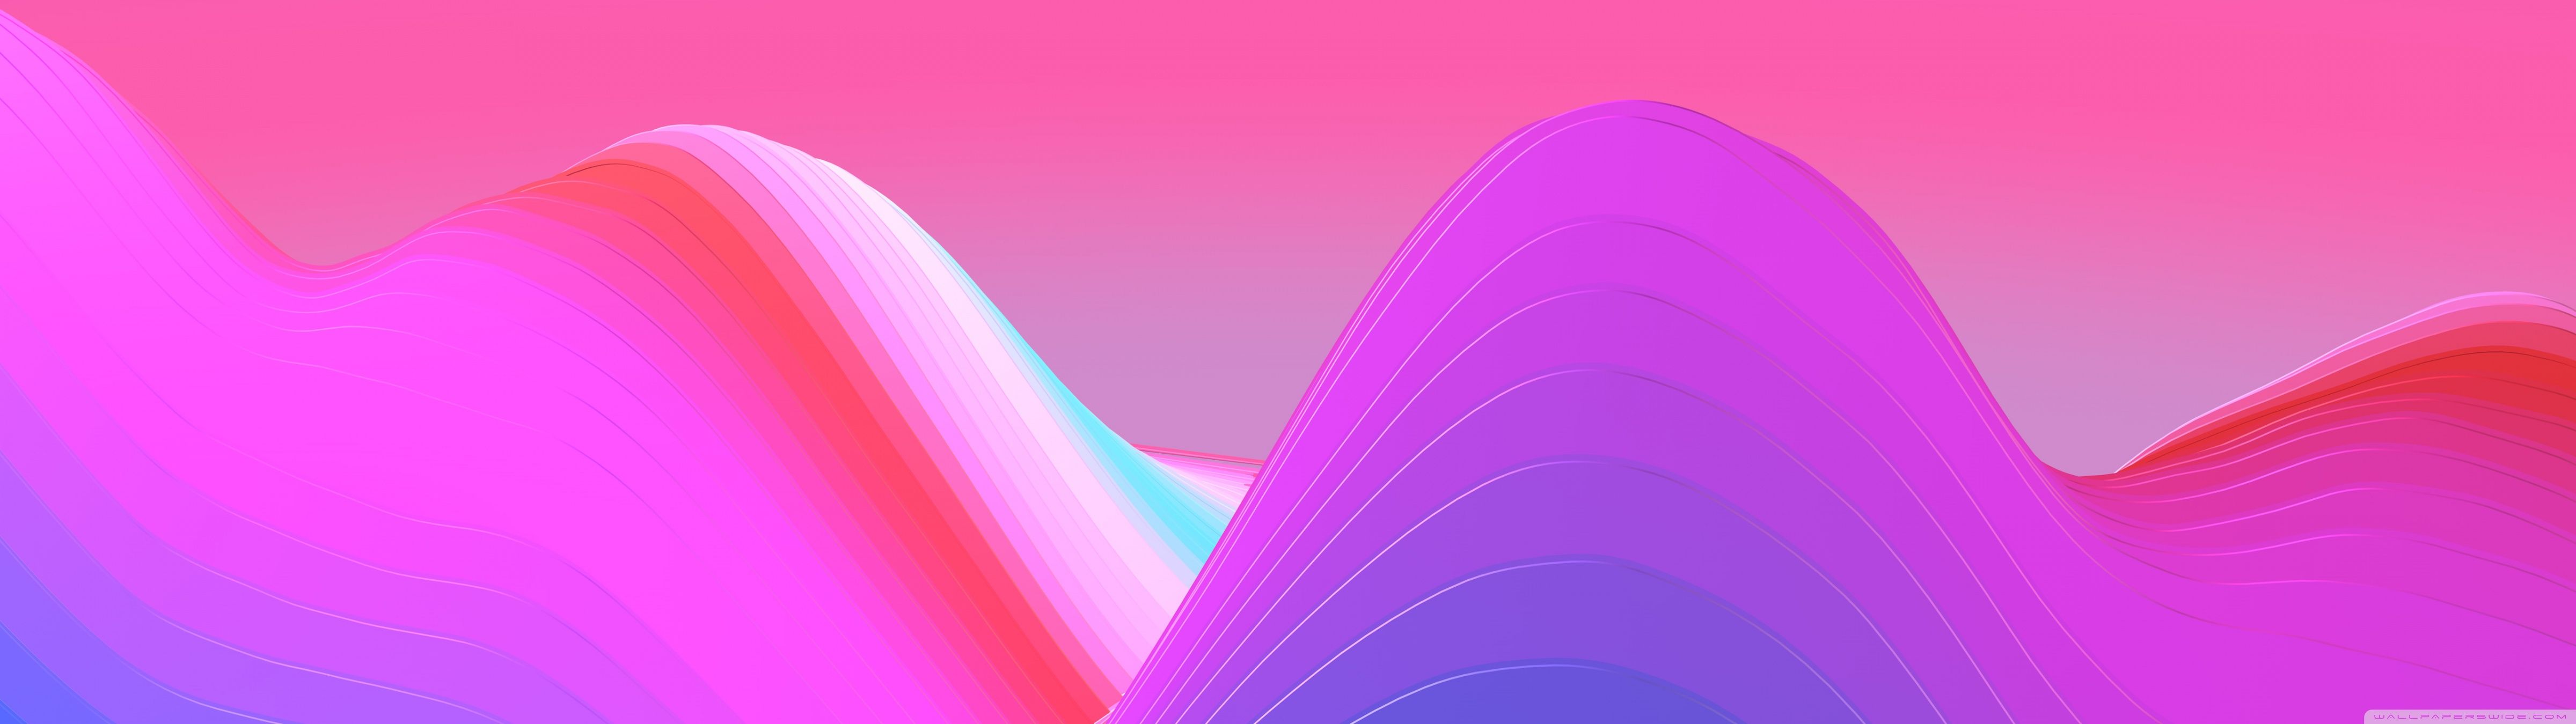 Abstract Color Wave Background Ultra HD Desktop Background Wallpaper for: Widescreen & UltraWide Desktop & Laptop, Multi Display, Dual & Triple Monitor, Tablet